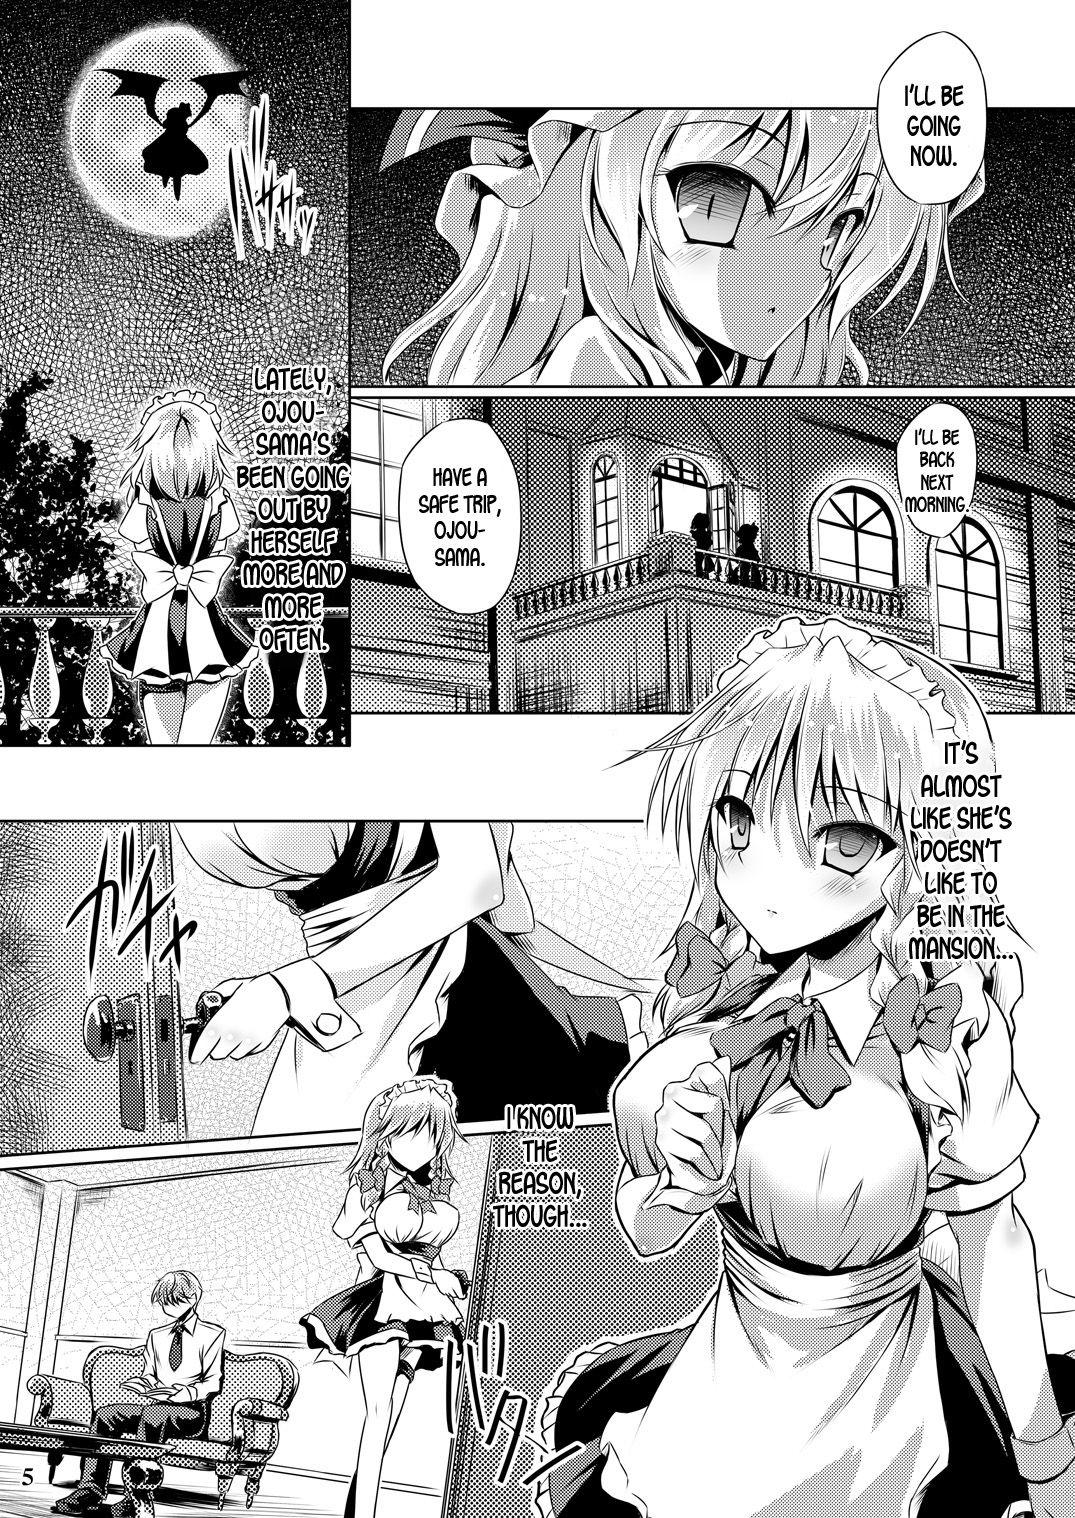 Petite Girl Porn Juusha no Tame no Serenade - Touhou project Reverse Cowgirl - Page 4